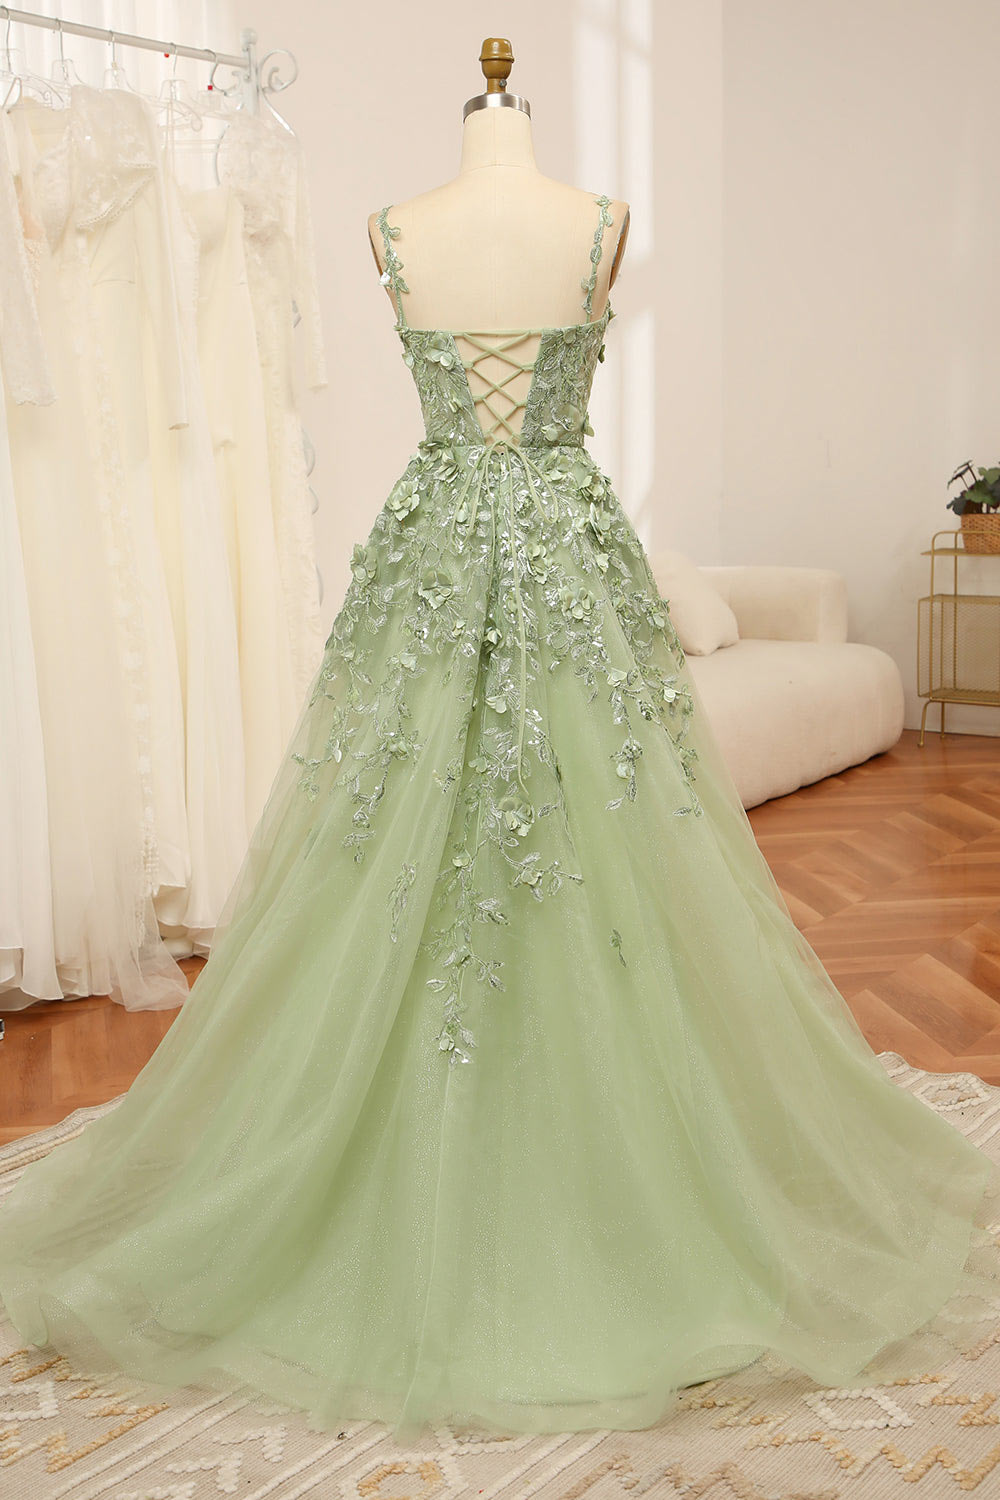 3D Embroidery floral lace party dress, green prom dress, custom fairy prom dress